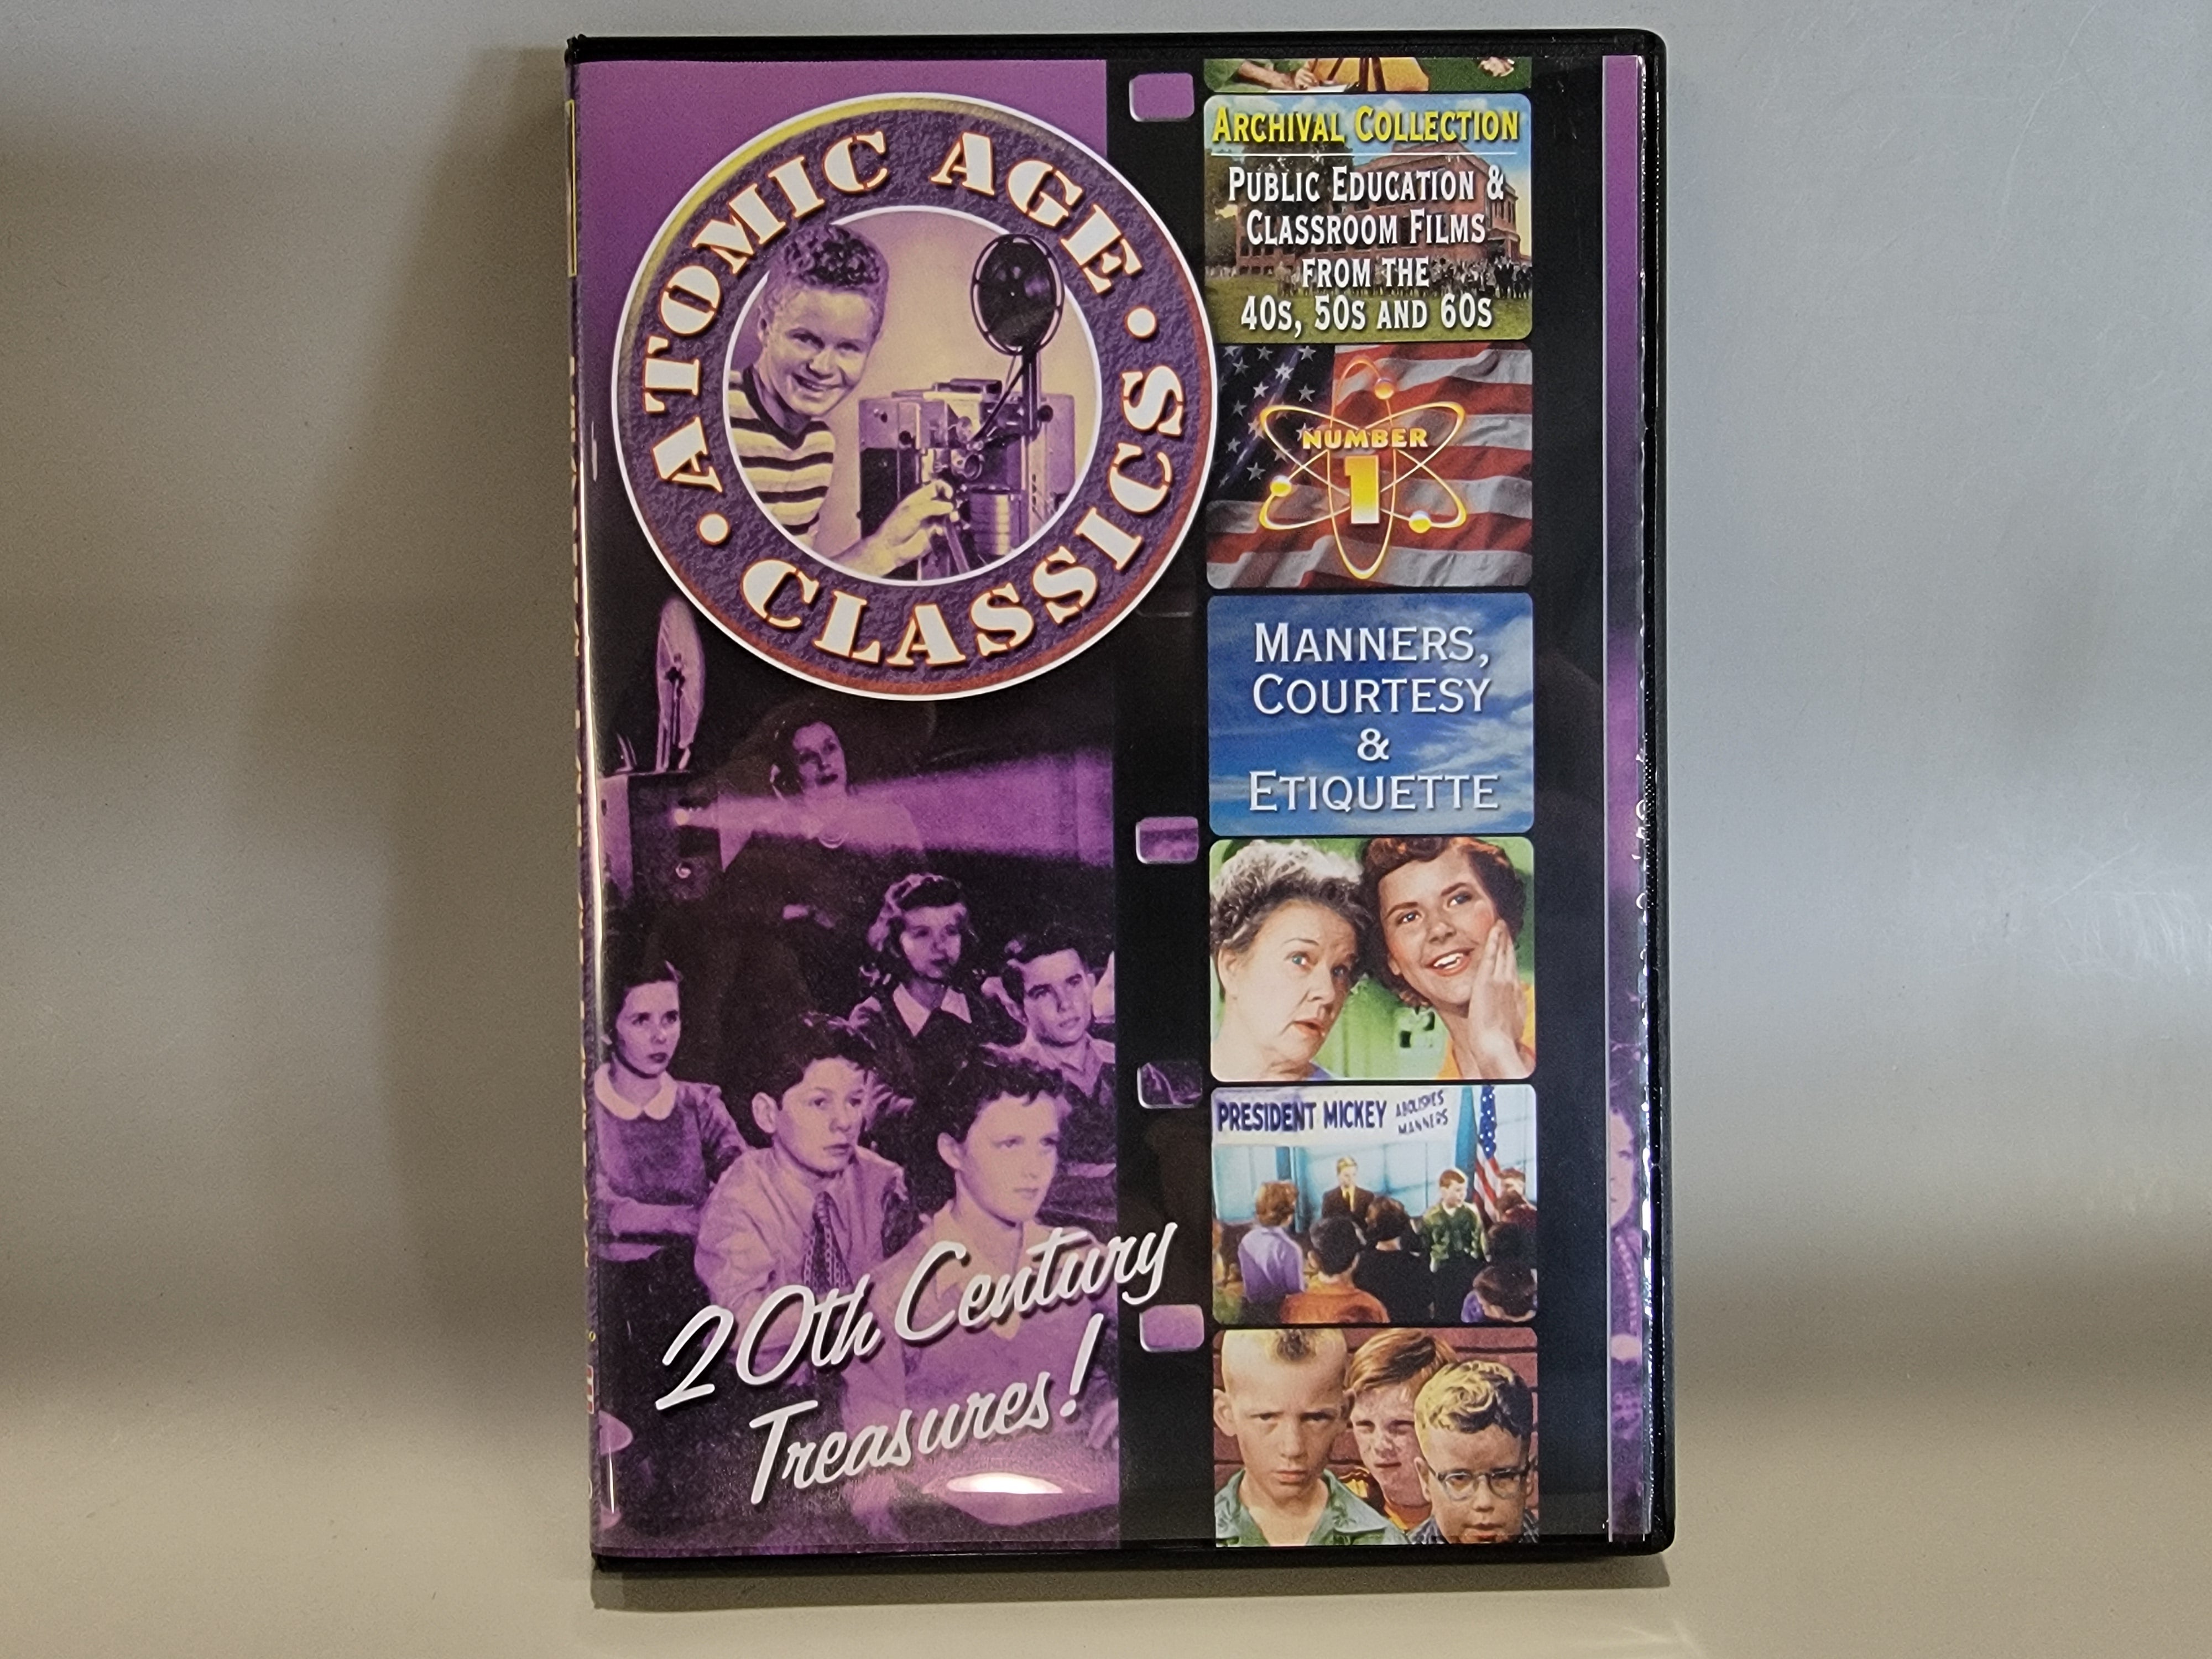 ATOMIC AGE CLASSICS VOLUME 1: MANNERS, COURTESY AND ETIQUETTE DVD [USED]